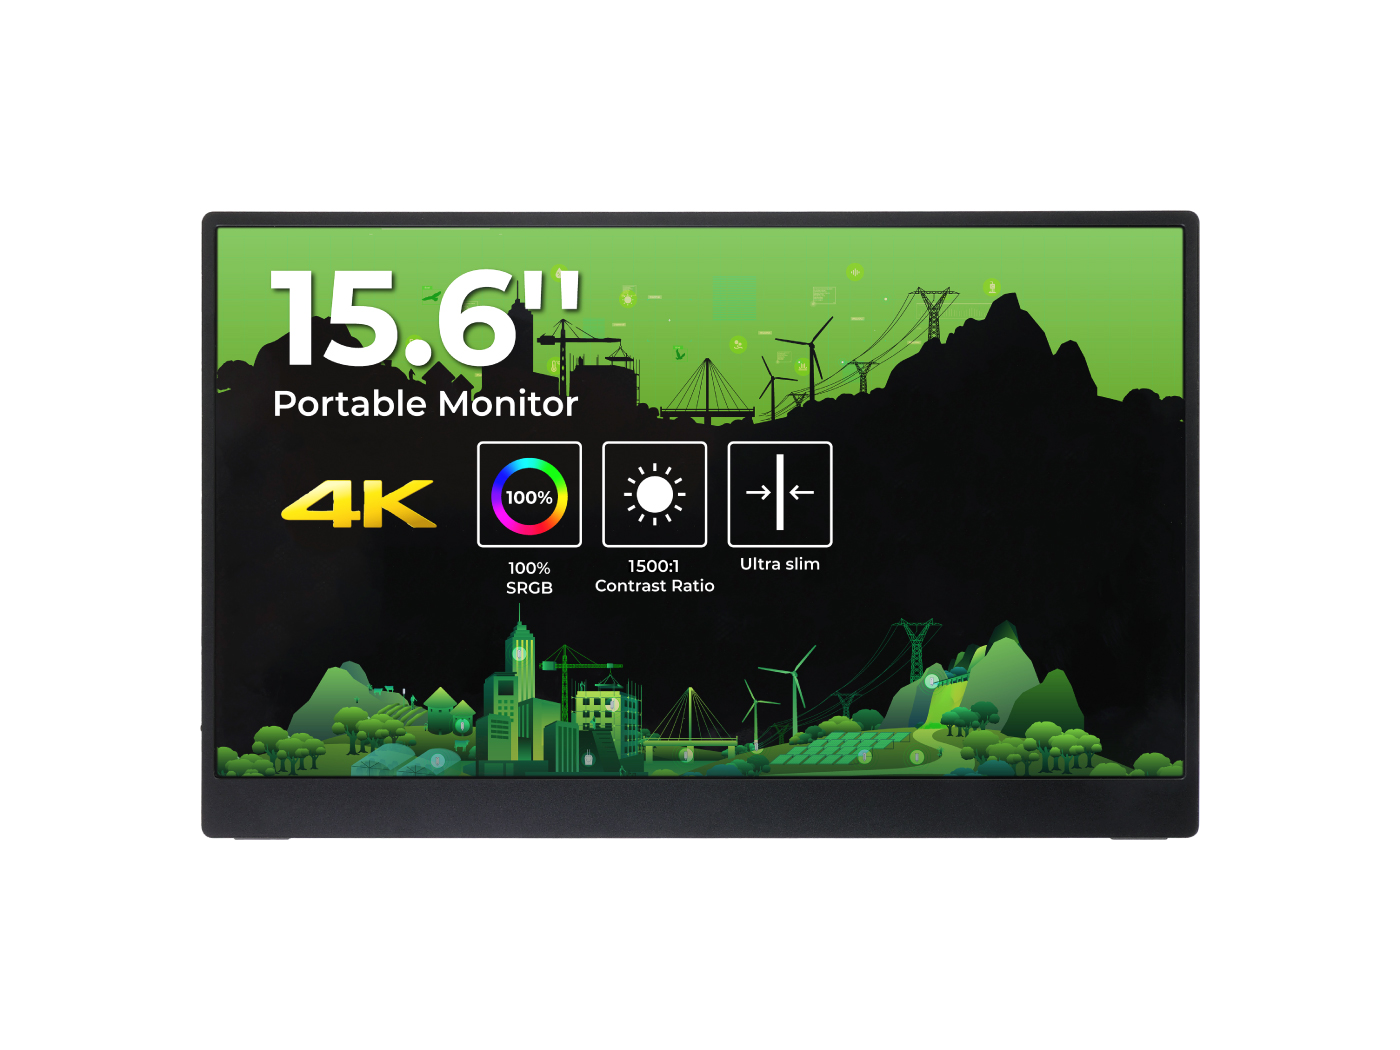 [104990823]15.6inch Monitor - 4K, IPS, 16:9, HDR, 100%sRGB, mini HDMI, Type-C, speaker, Compatible for Raspberry Pi/Nvidia Jetson/PC/reRouter